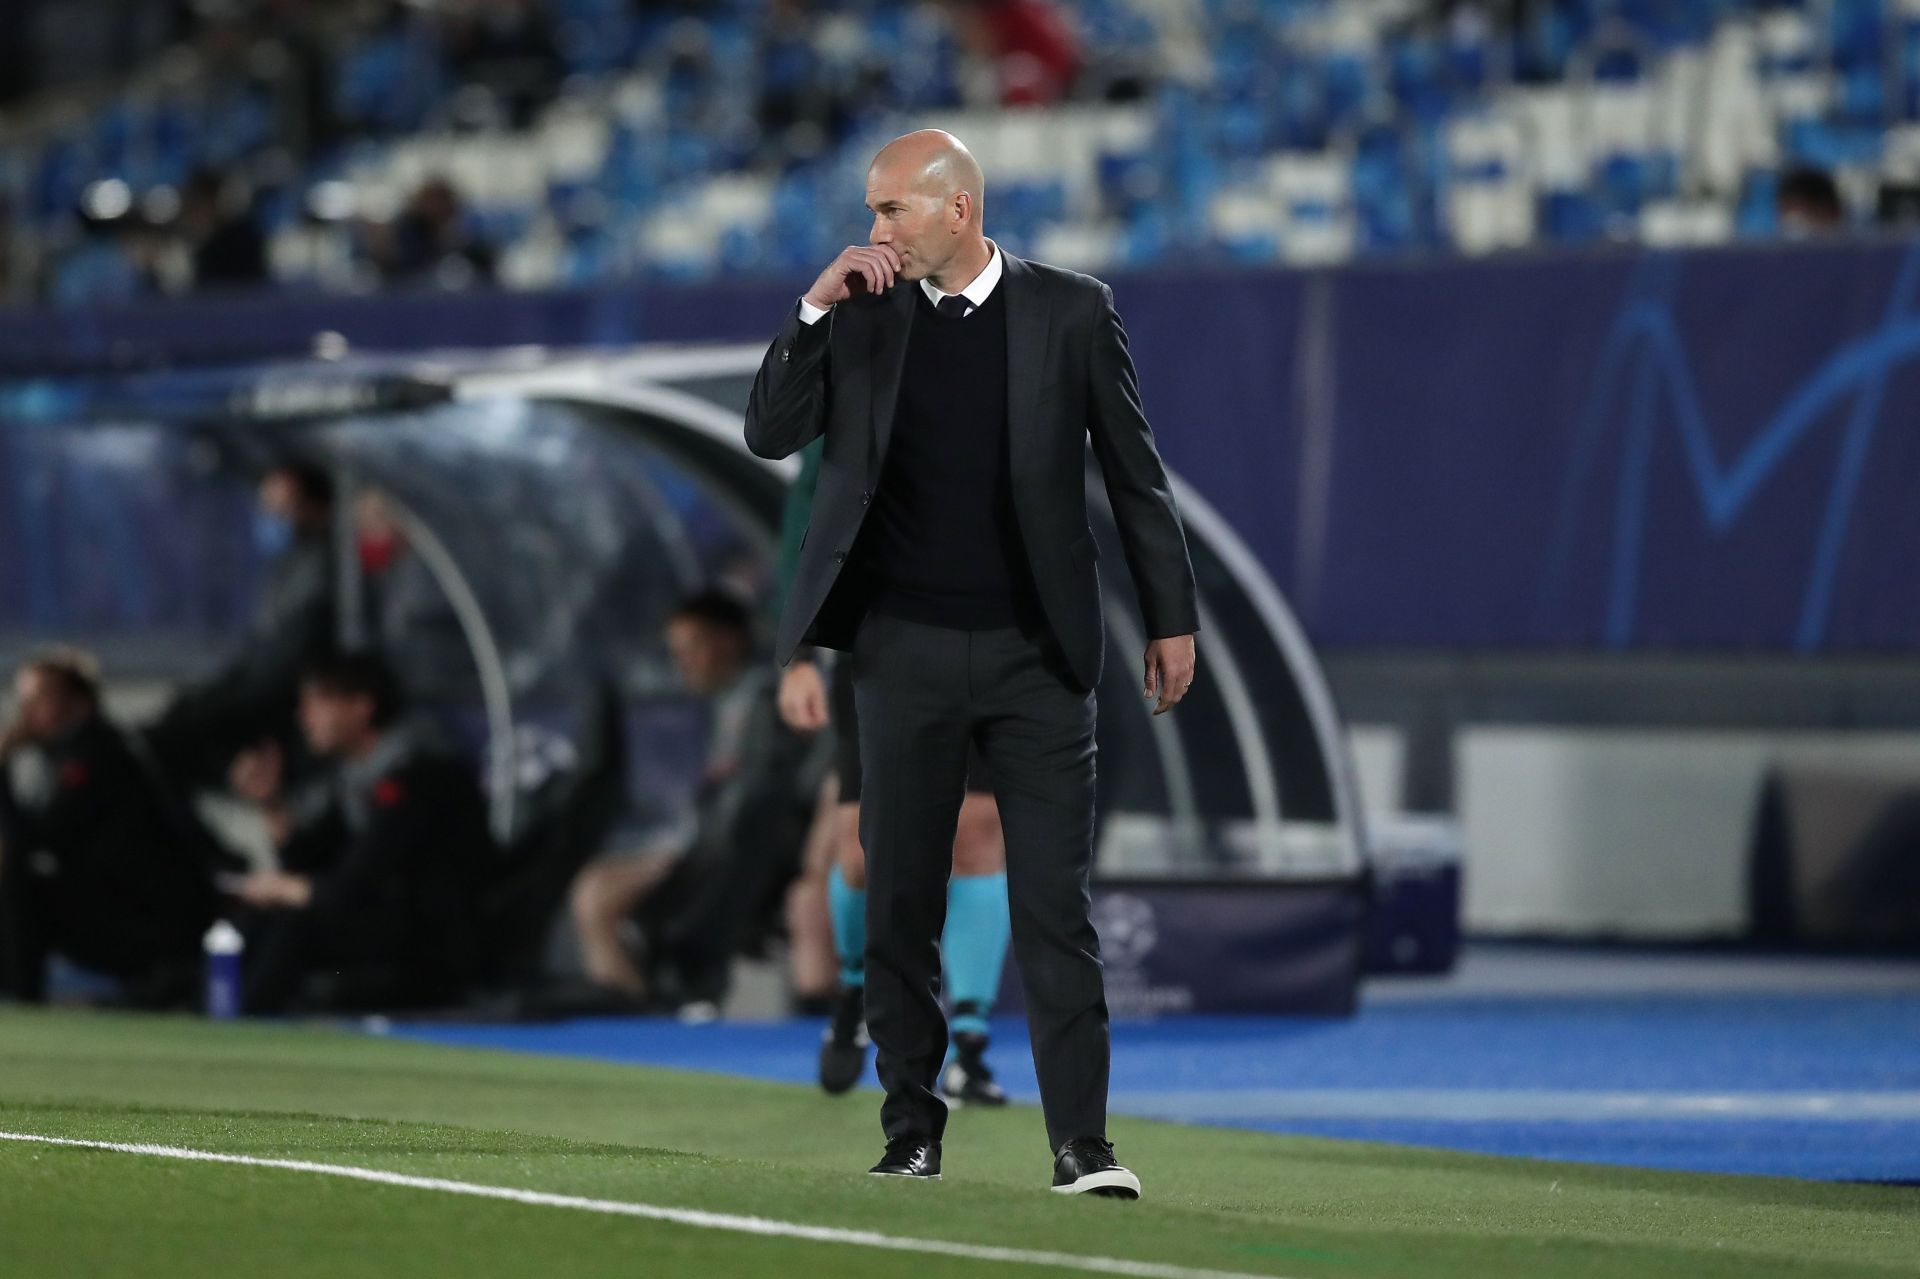 Zinedine Zidane won the UEFA Champions League as both player and manager.